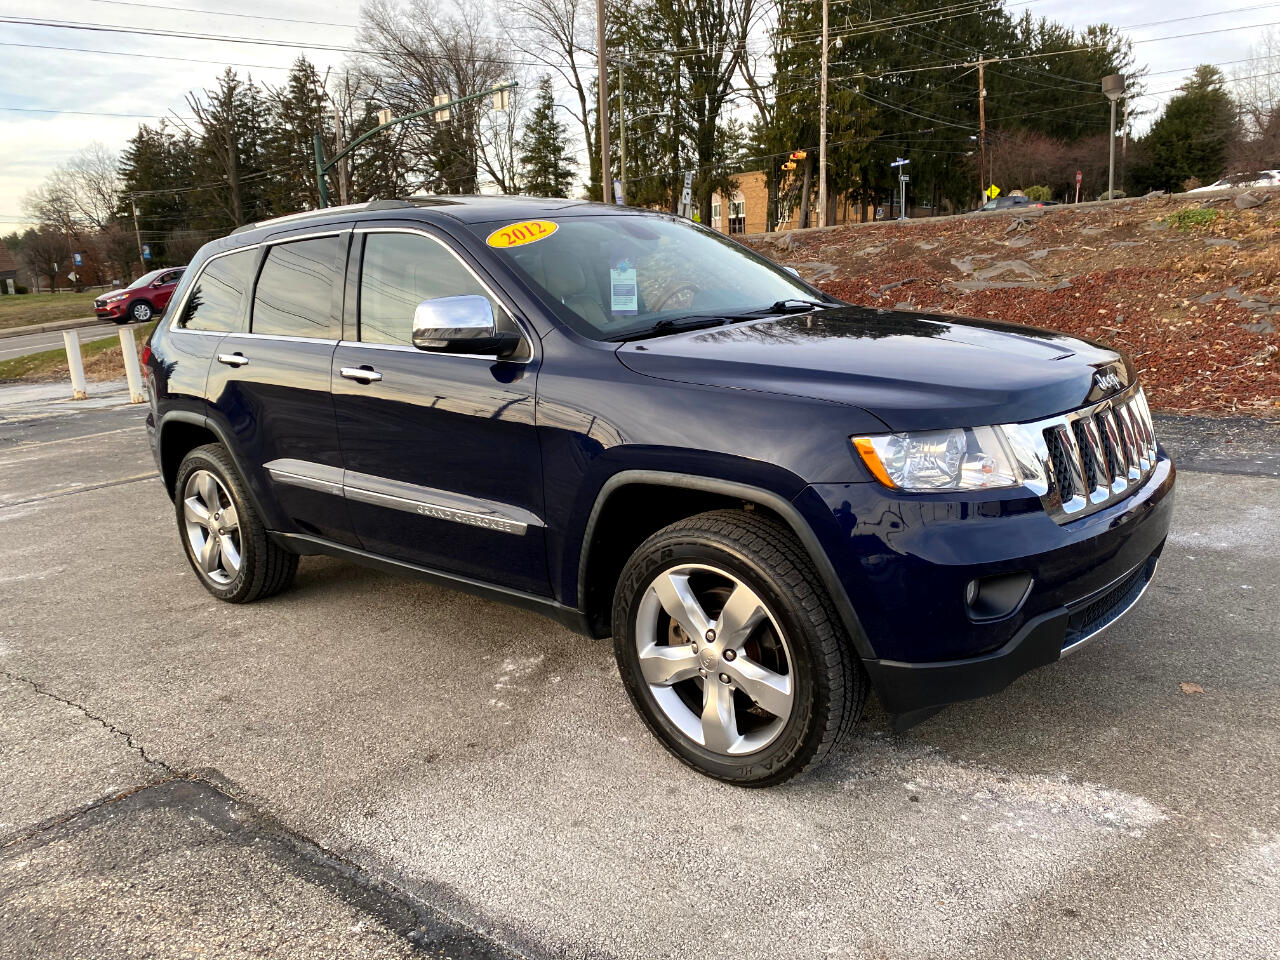 Used 2012 Jeep Grand Cherokee Overland 4wd For Sale In